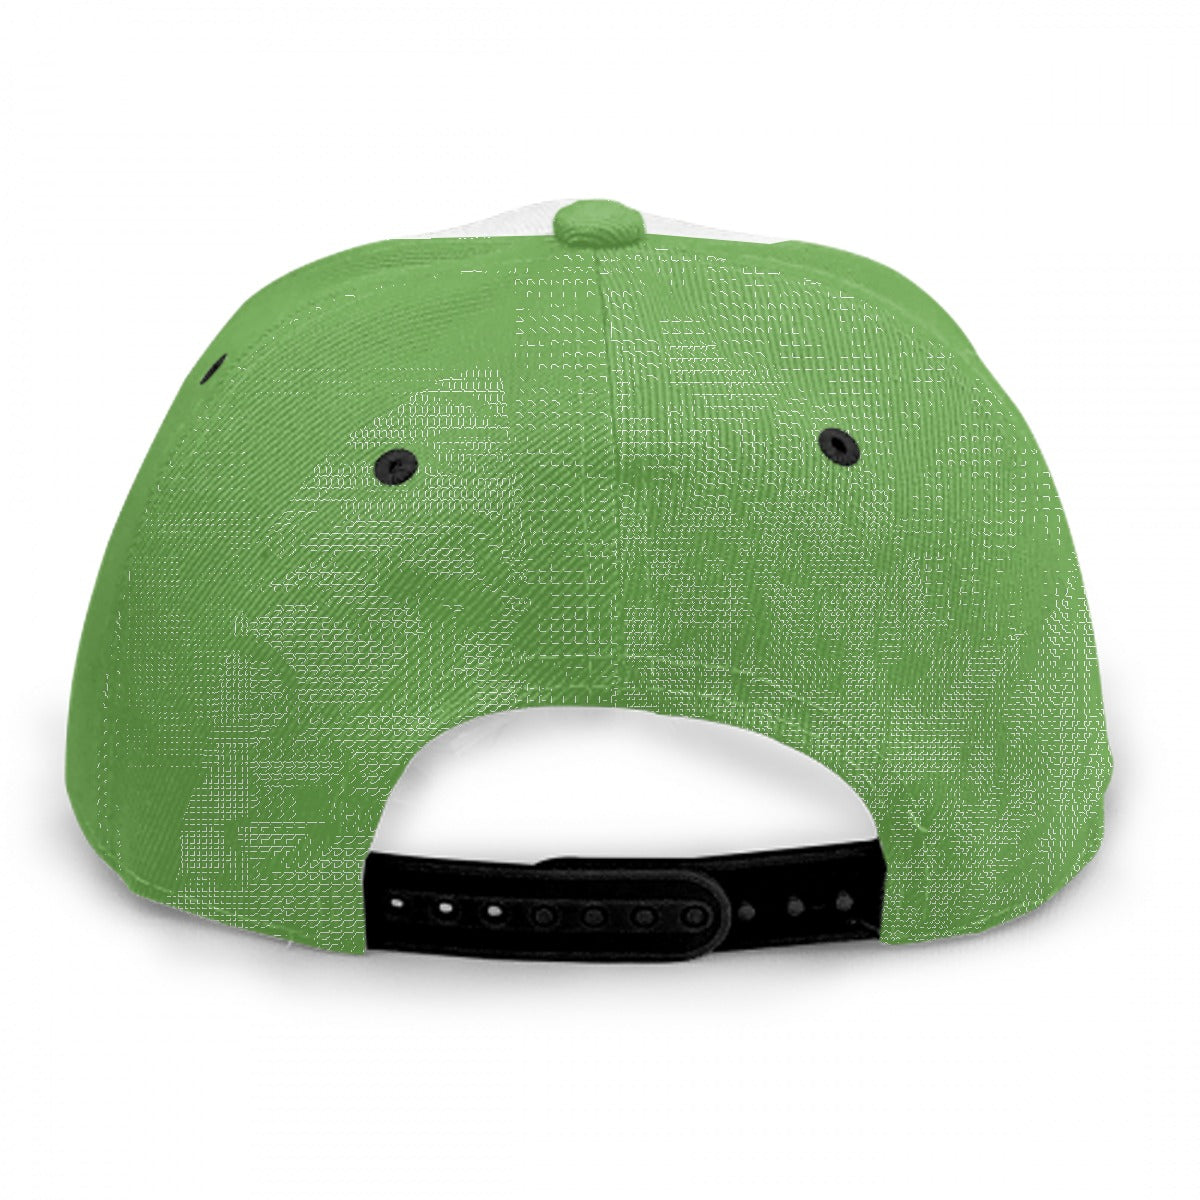 Snazzy Frenchie-Featured Unisex Baseball Cap